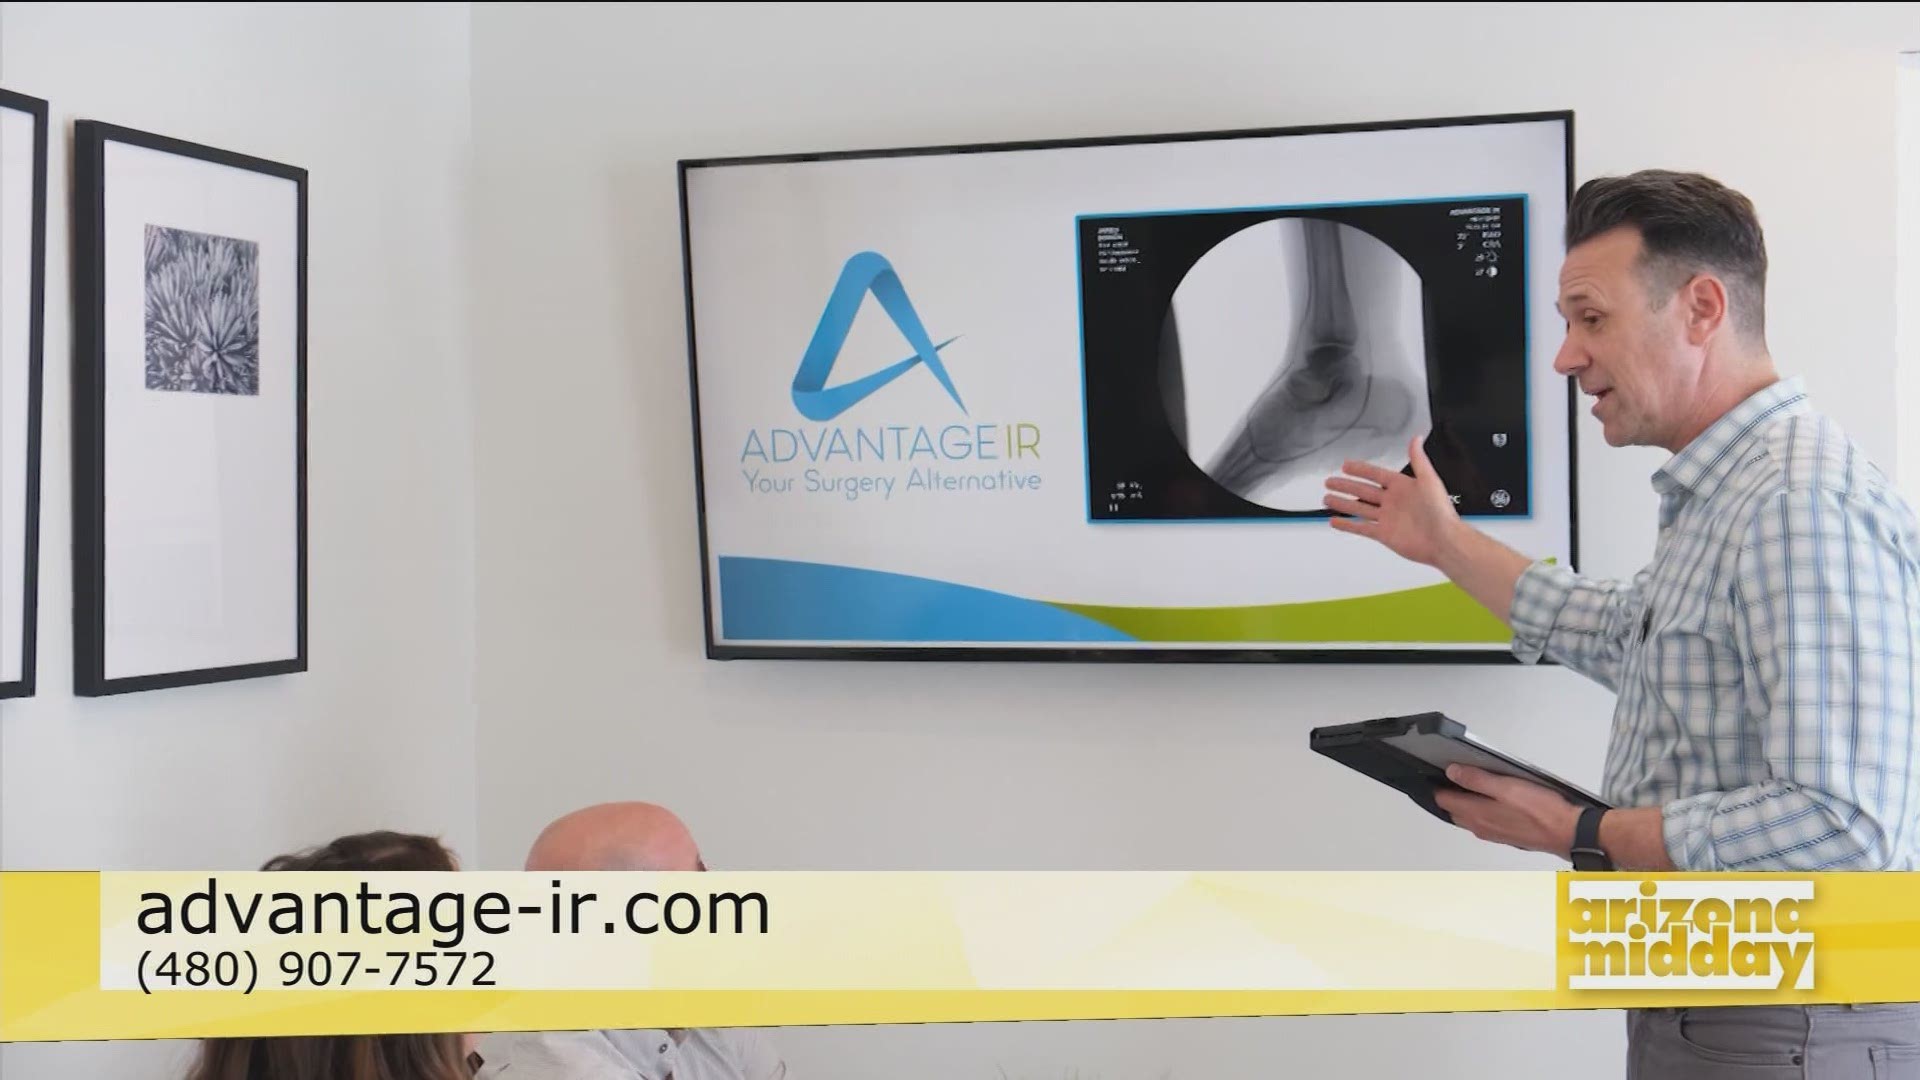 Dr. Davis Wood with Advantage IR tells us about Interventional Radiology